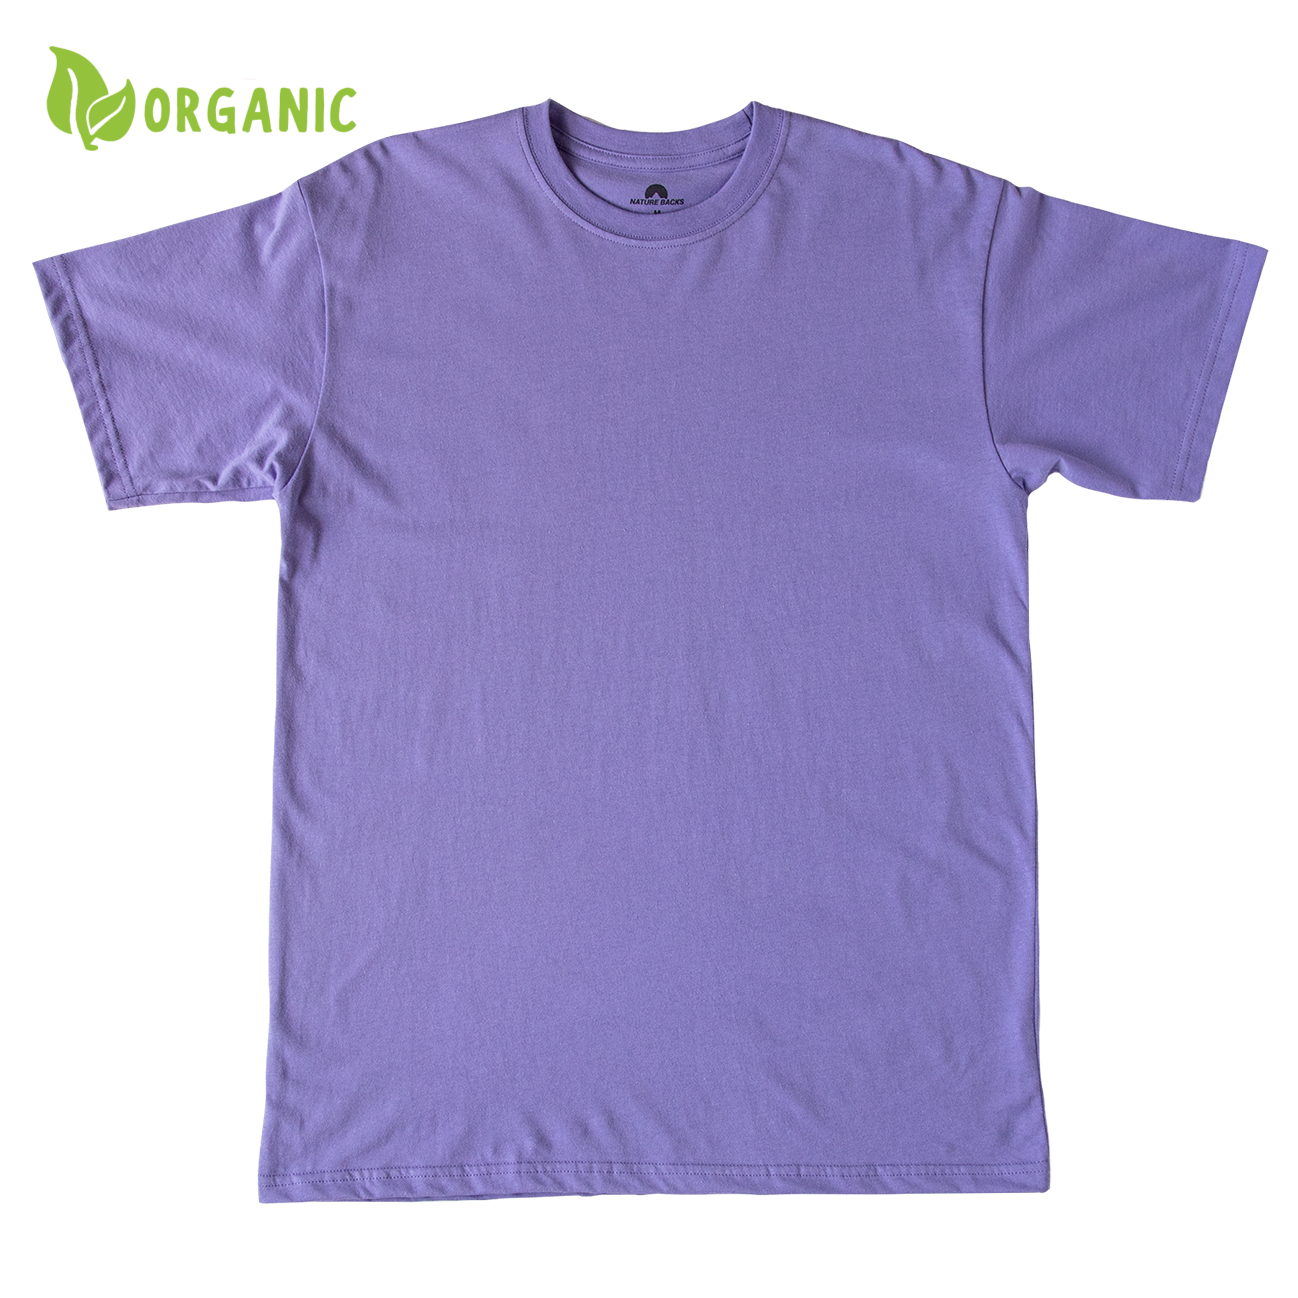 Nature Backs Short Sleeve 100% Organic Cotton T-Shirt | Minimalist Twilight Short Sleeve made with Eco-Friendly Fibers Sustainably made in the USA 